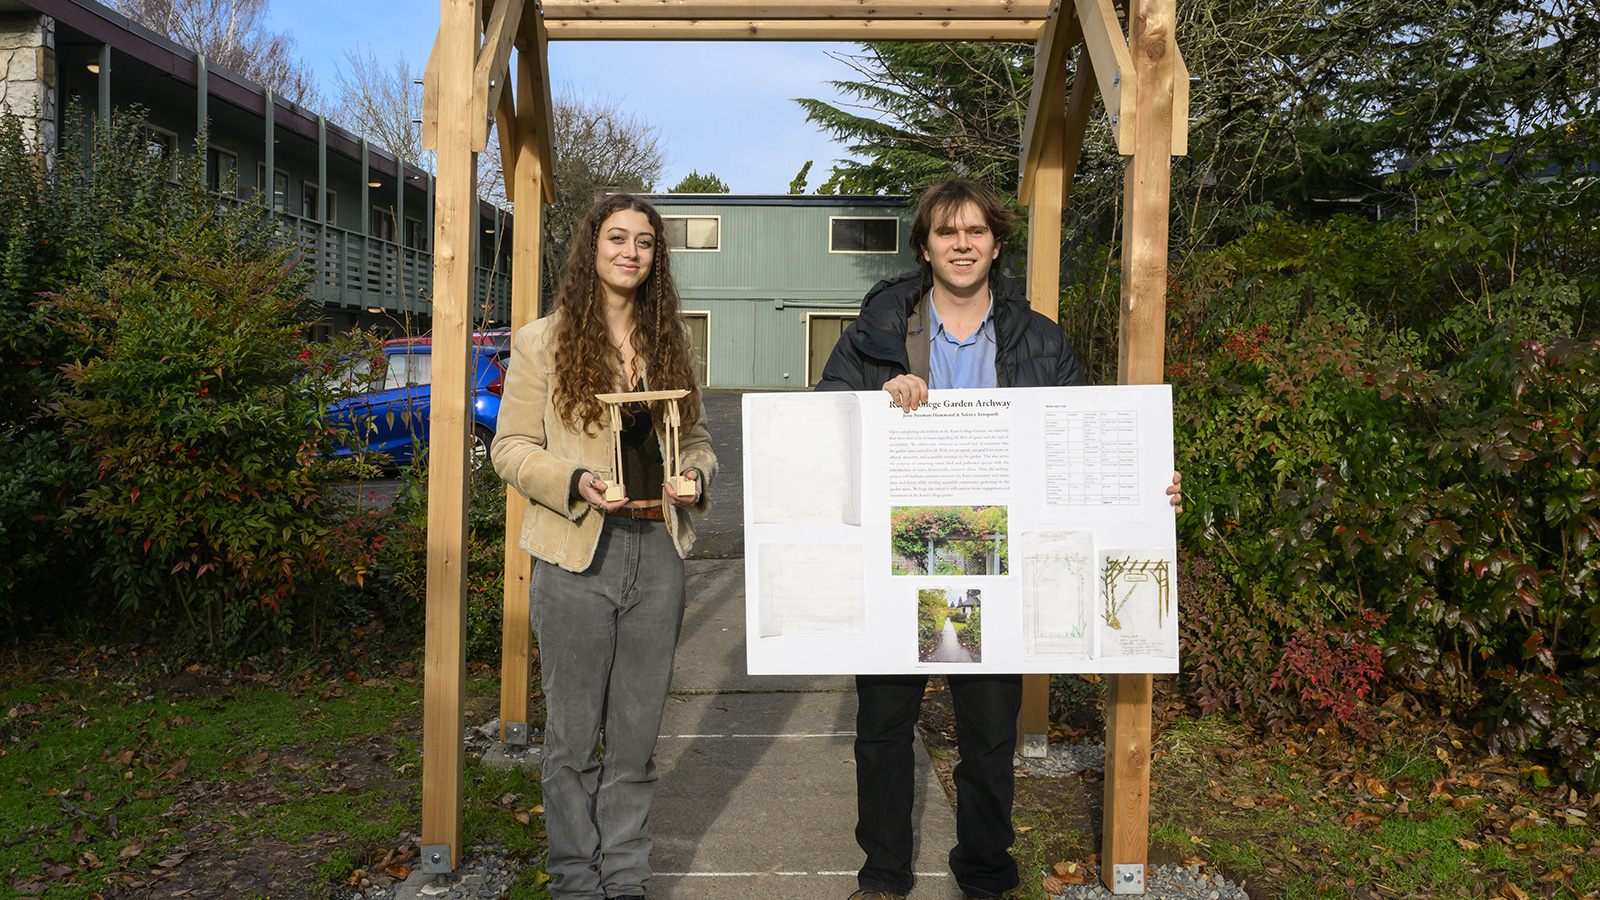 Two students presenting their design, in front of the arbor